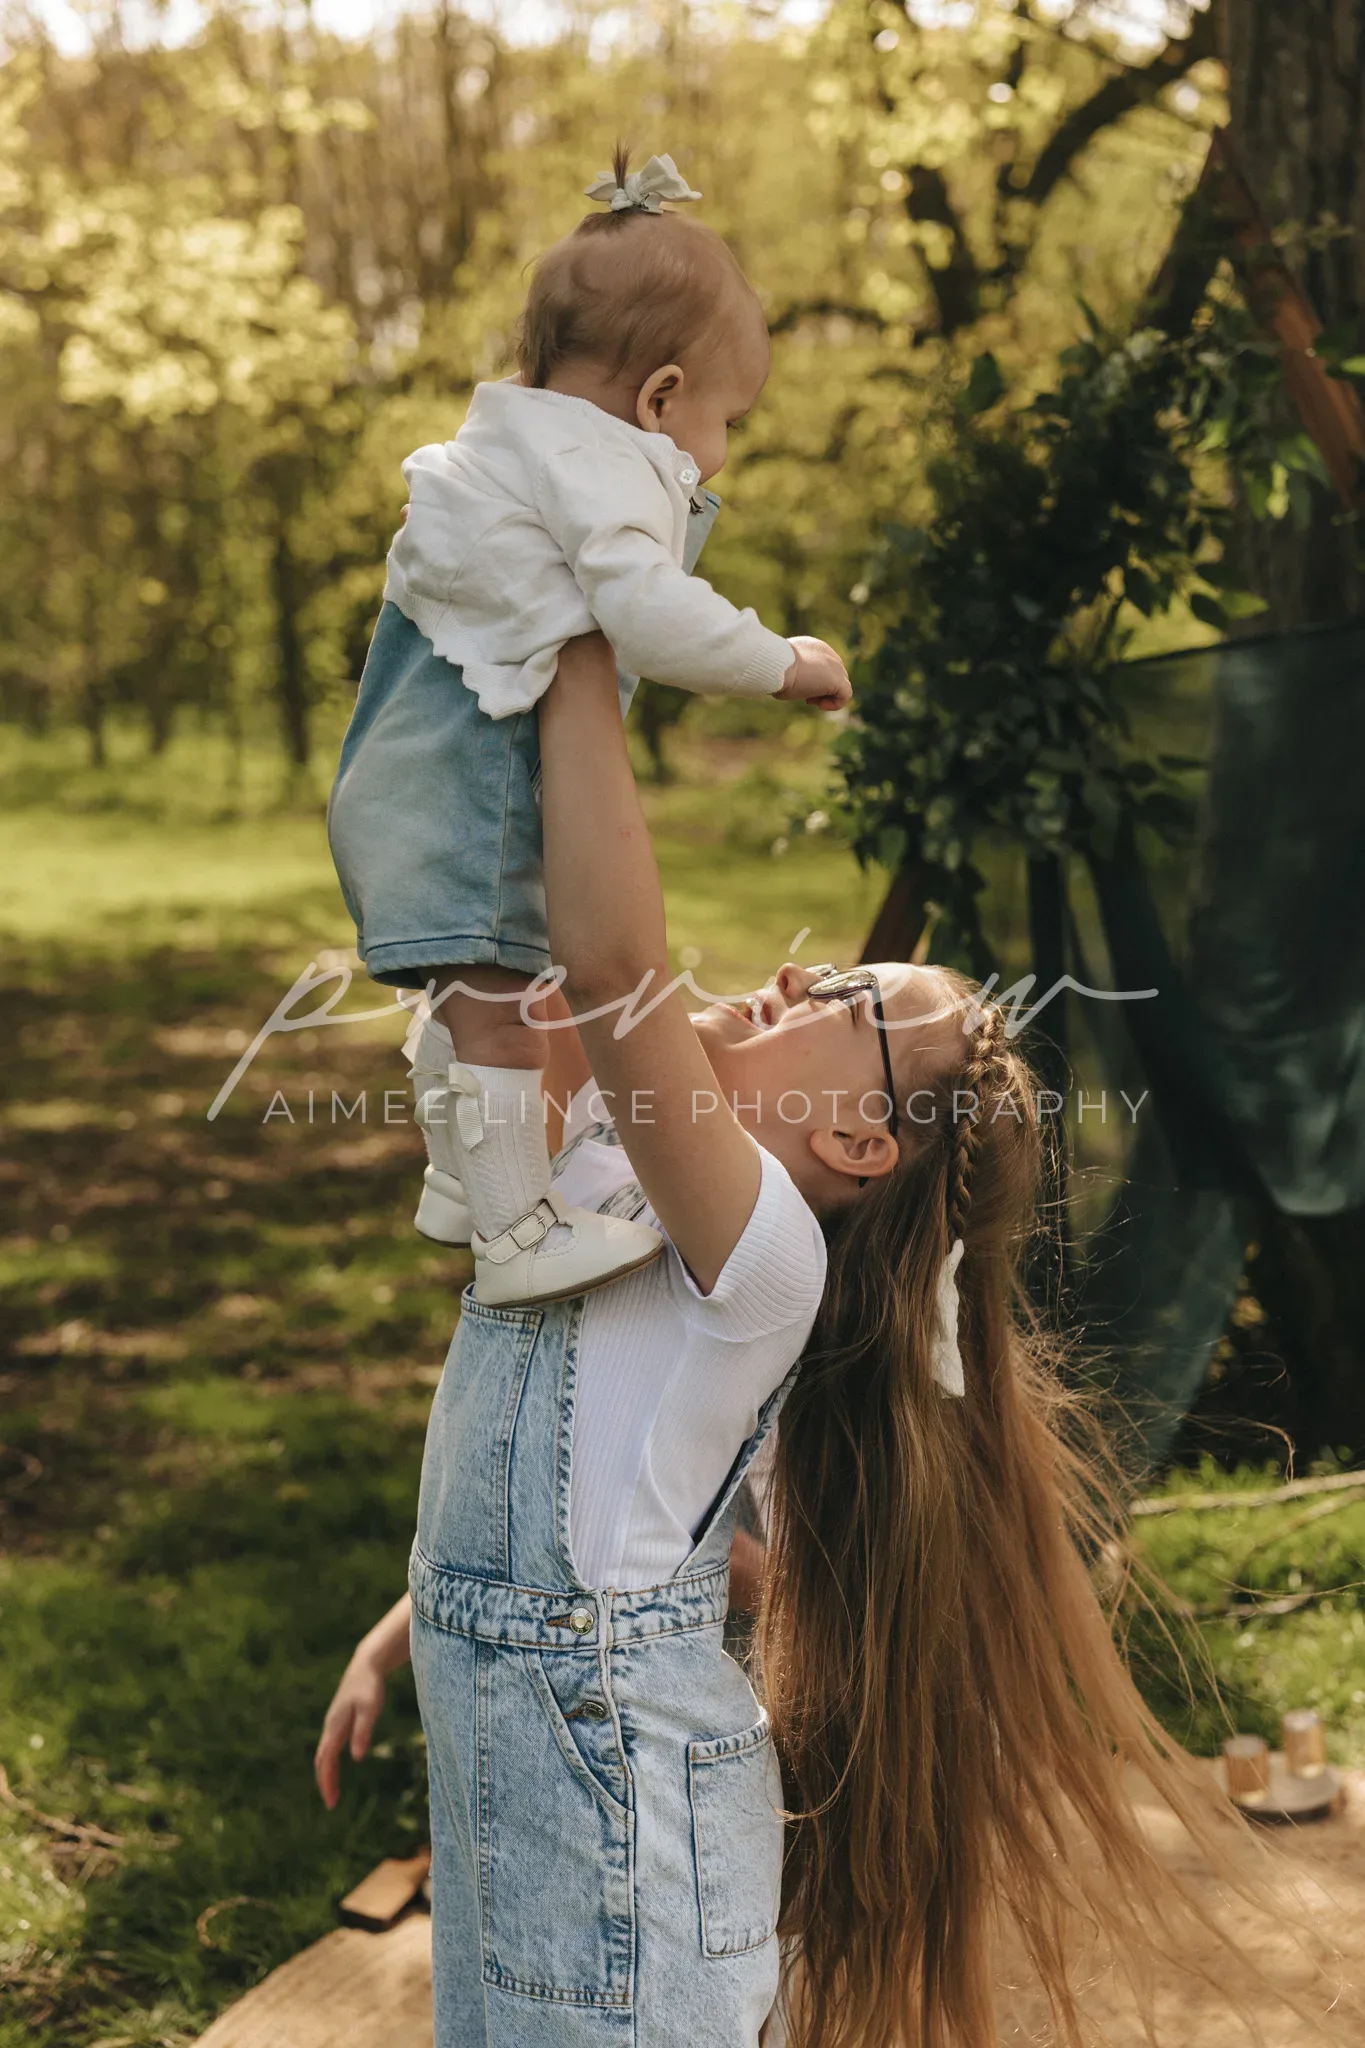 A woman in a denim overall lifts a baby girl into the air in a sunlit park. the child, wearing a light blue jacket and white leggings, smiles joyously. long shadows and lush greenery surround them.